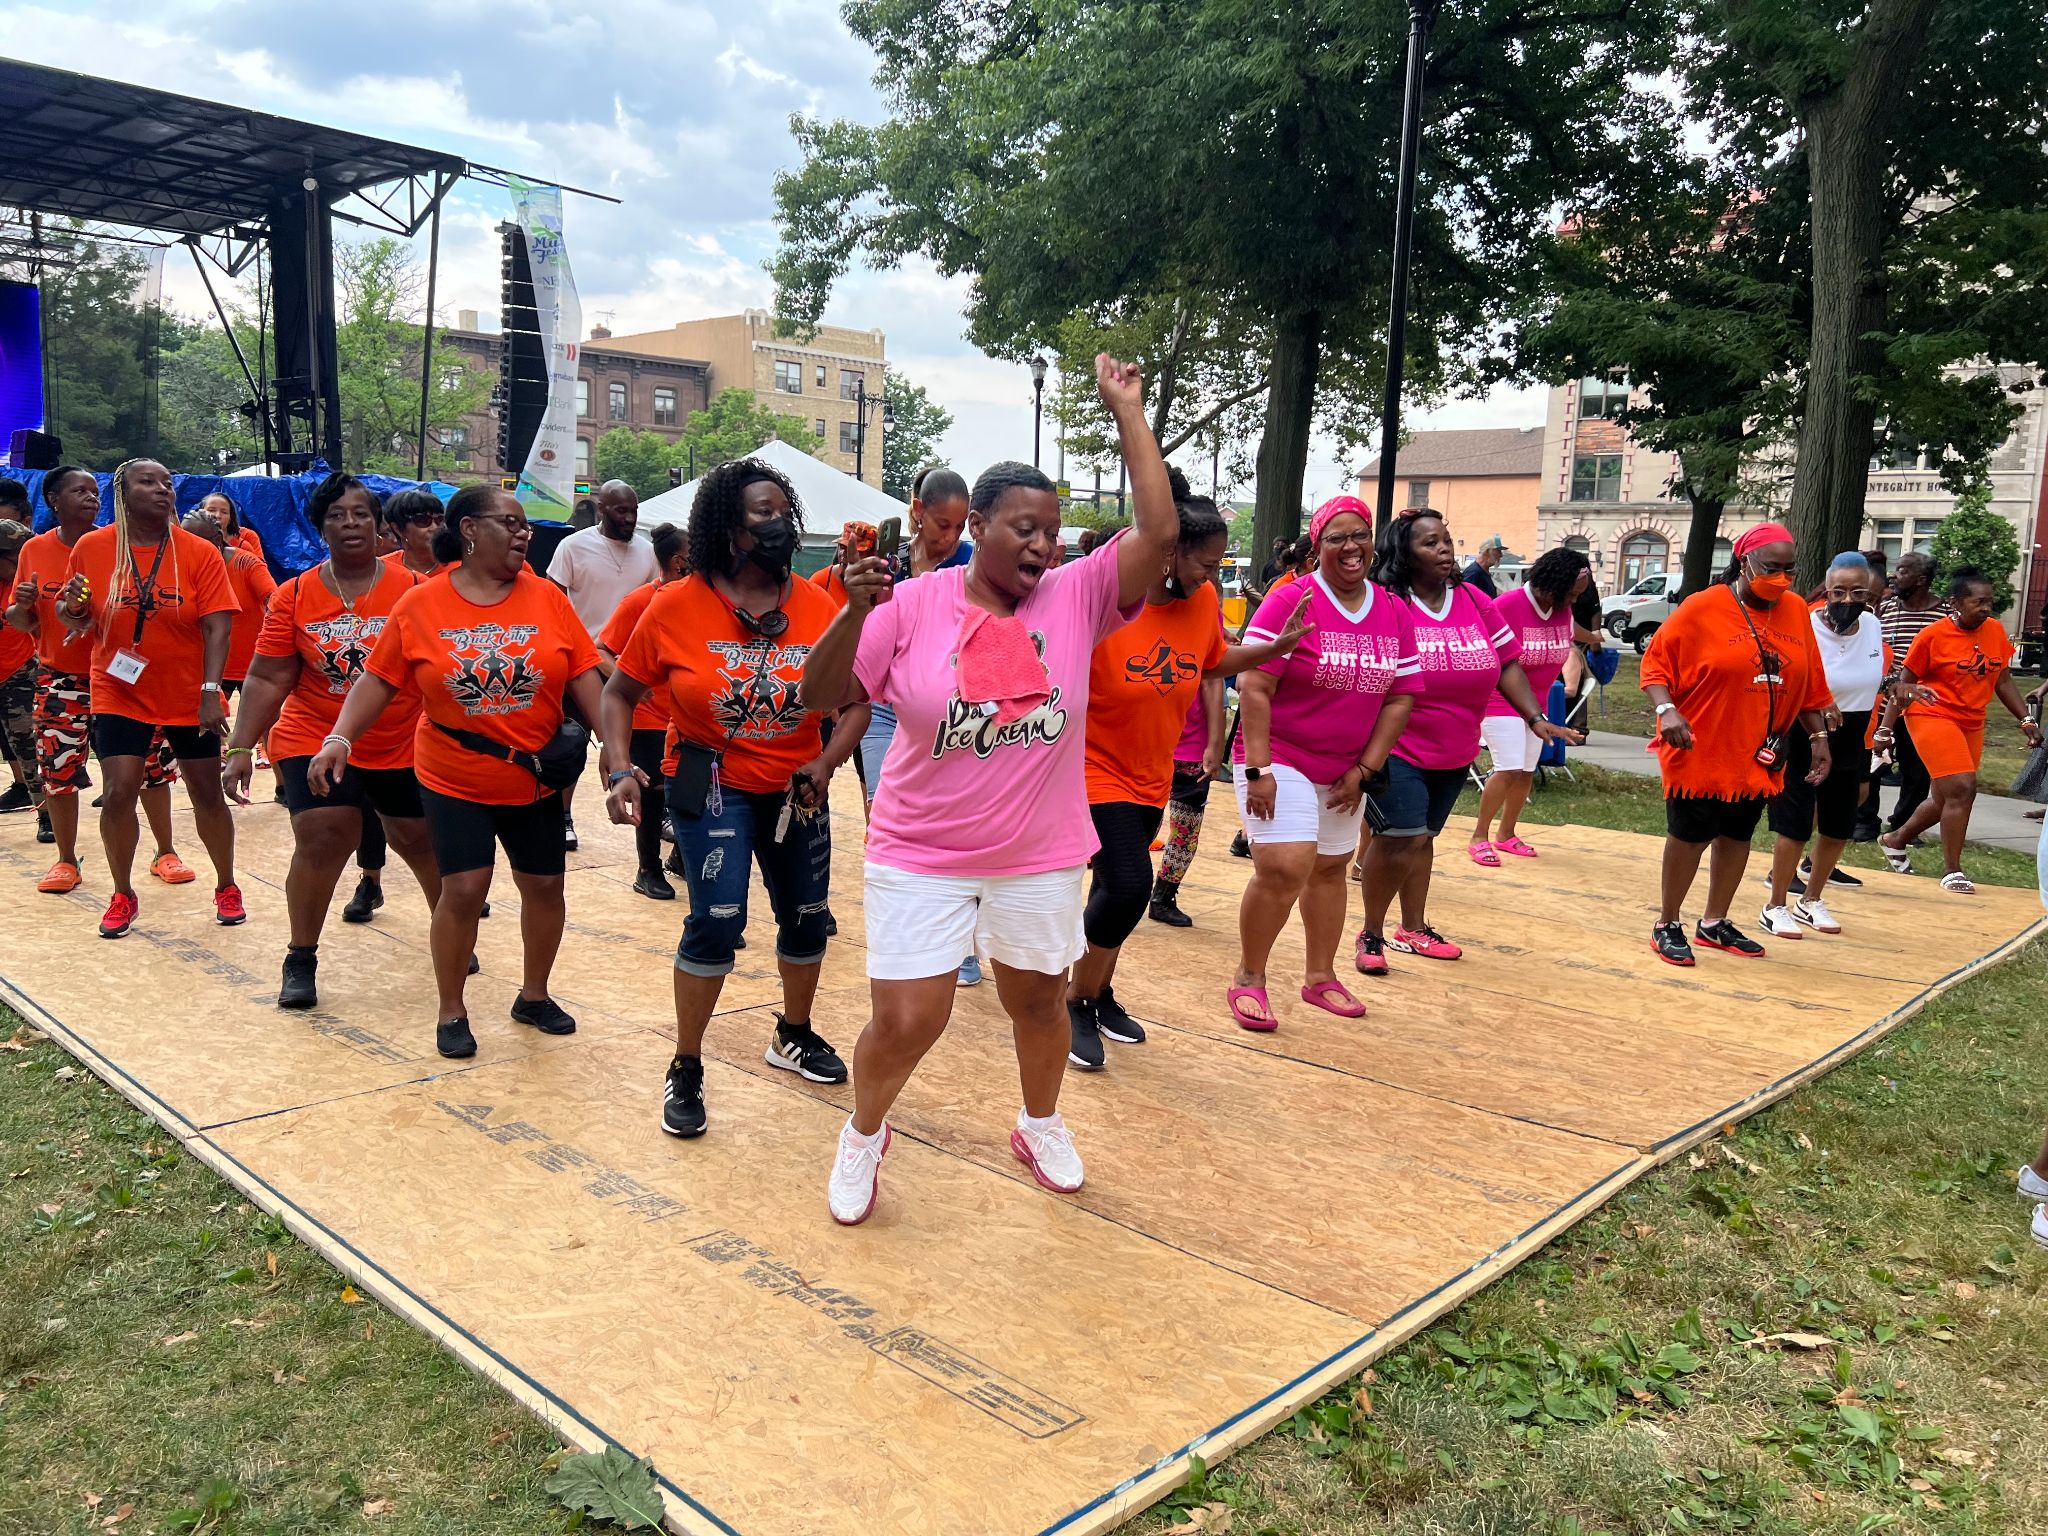 NEWARK NEW JERSEY’S ‘BEST KEPT SECRET’ NO MORE!  HERE’S A RECAP OF ‘SOUL LINE DANCING’ AT THE 15th ANNIVERSARY LINCOLN PARK MUSIC FESTIVAL